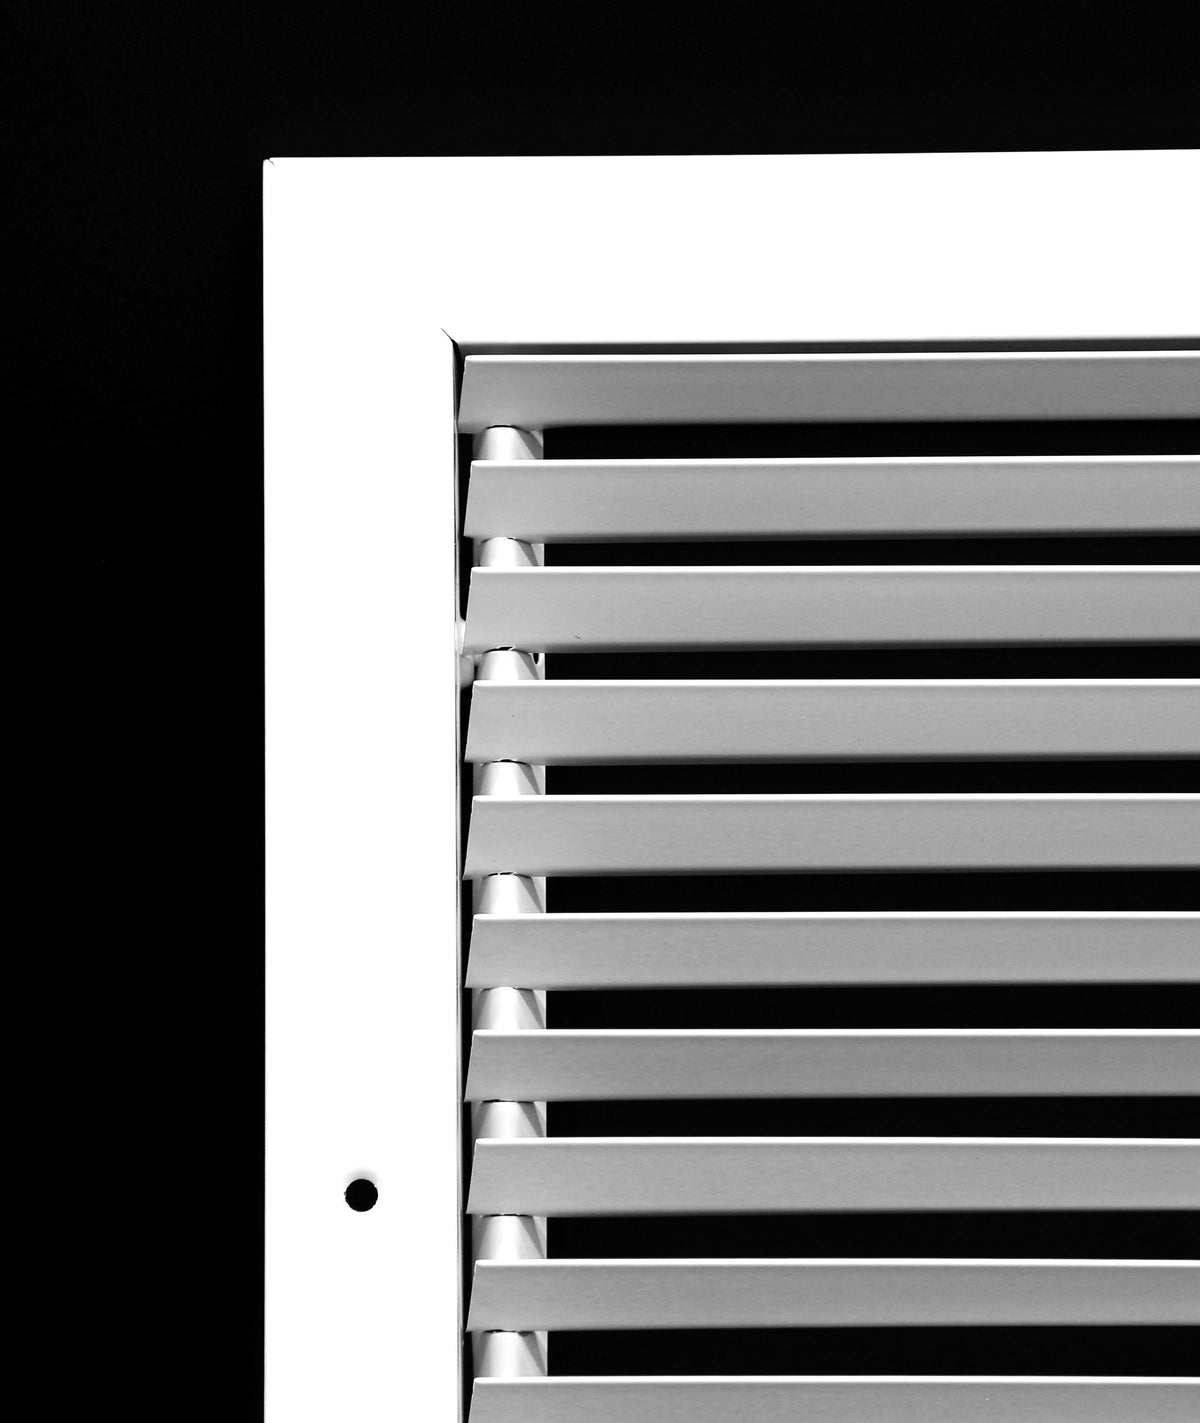 6&quot; x 6&quot; Fixed Bar Return Grille - Sidewall and Ceiling